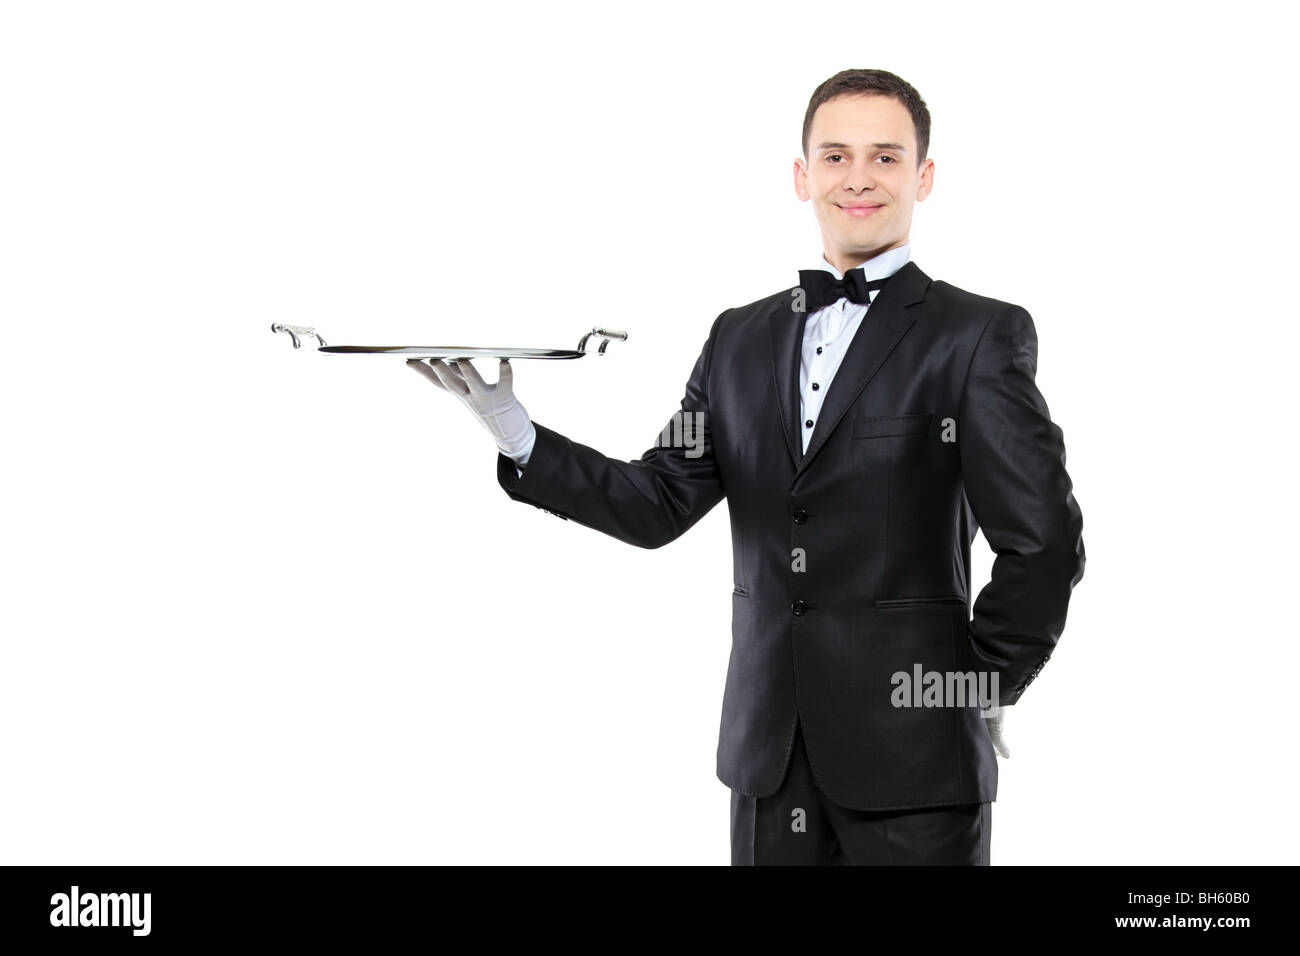 Butler holding an empty tray, isolated on white background Stock Photo